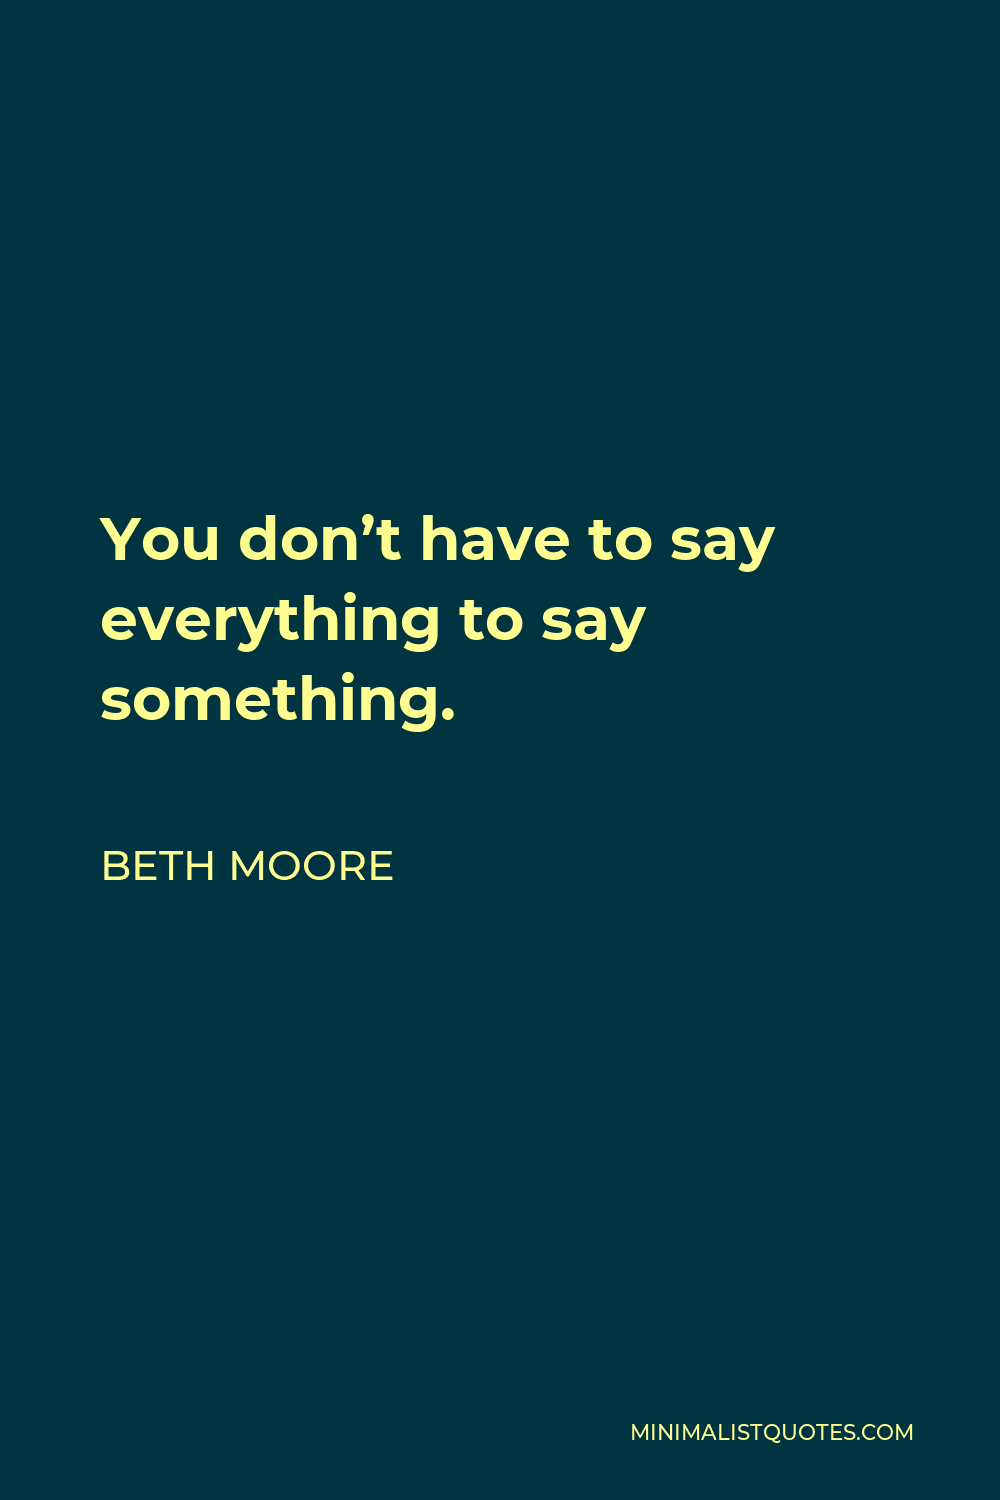 Beth Moore Quote - You don’t have to say everything to say something.